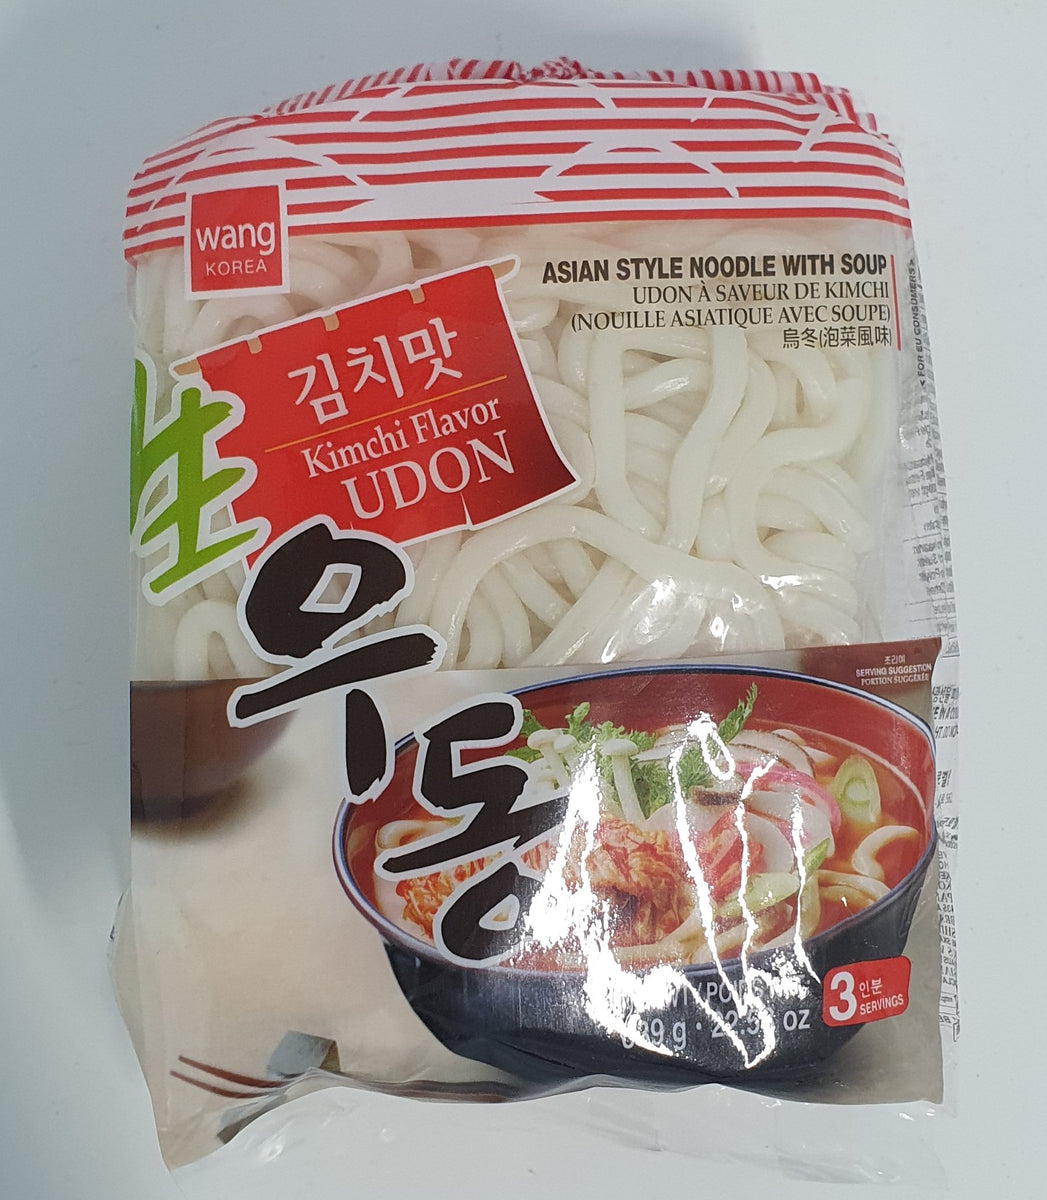 Wang - Kimchi Flavor Udon Noodle 639g – Fresh Food Market - Rooty Hill